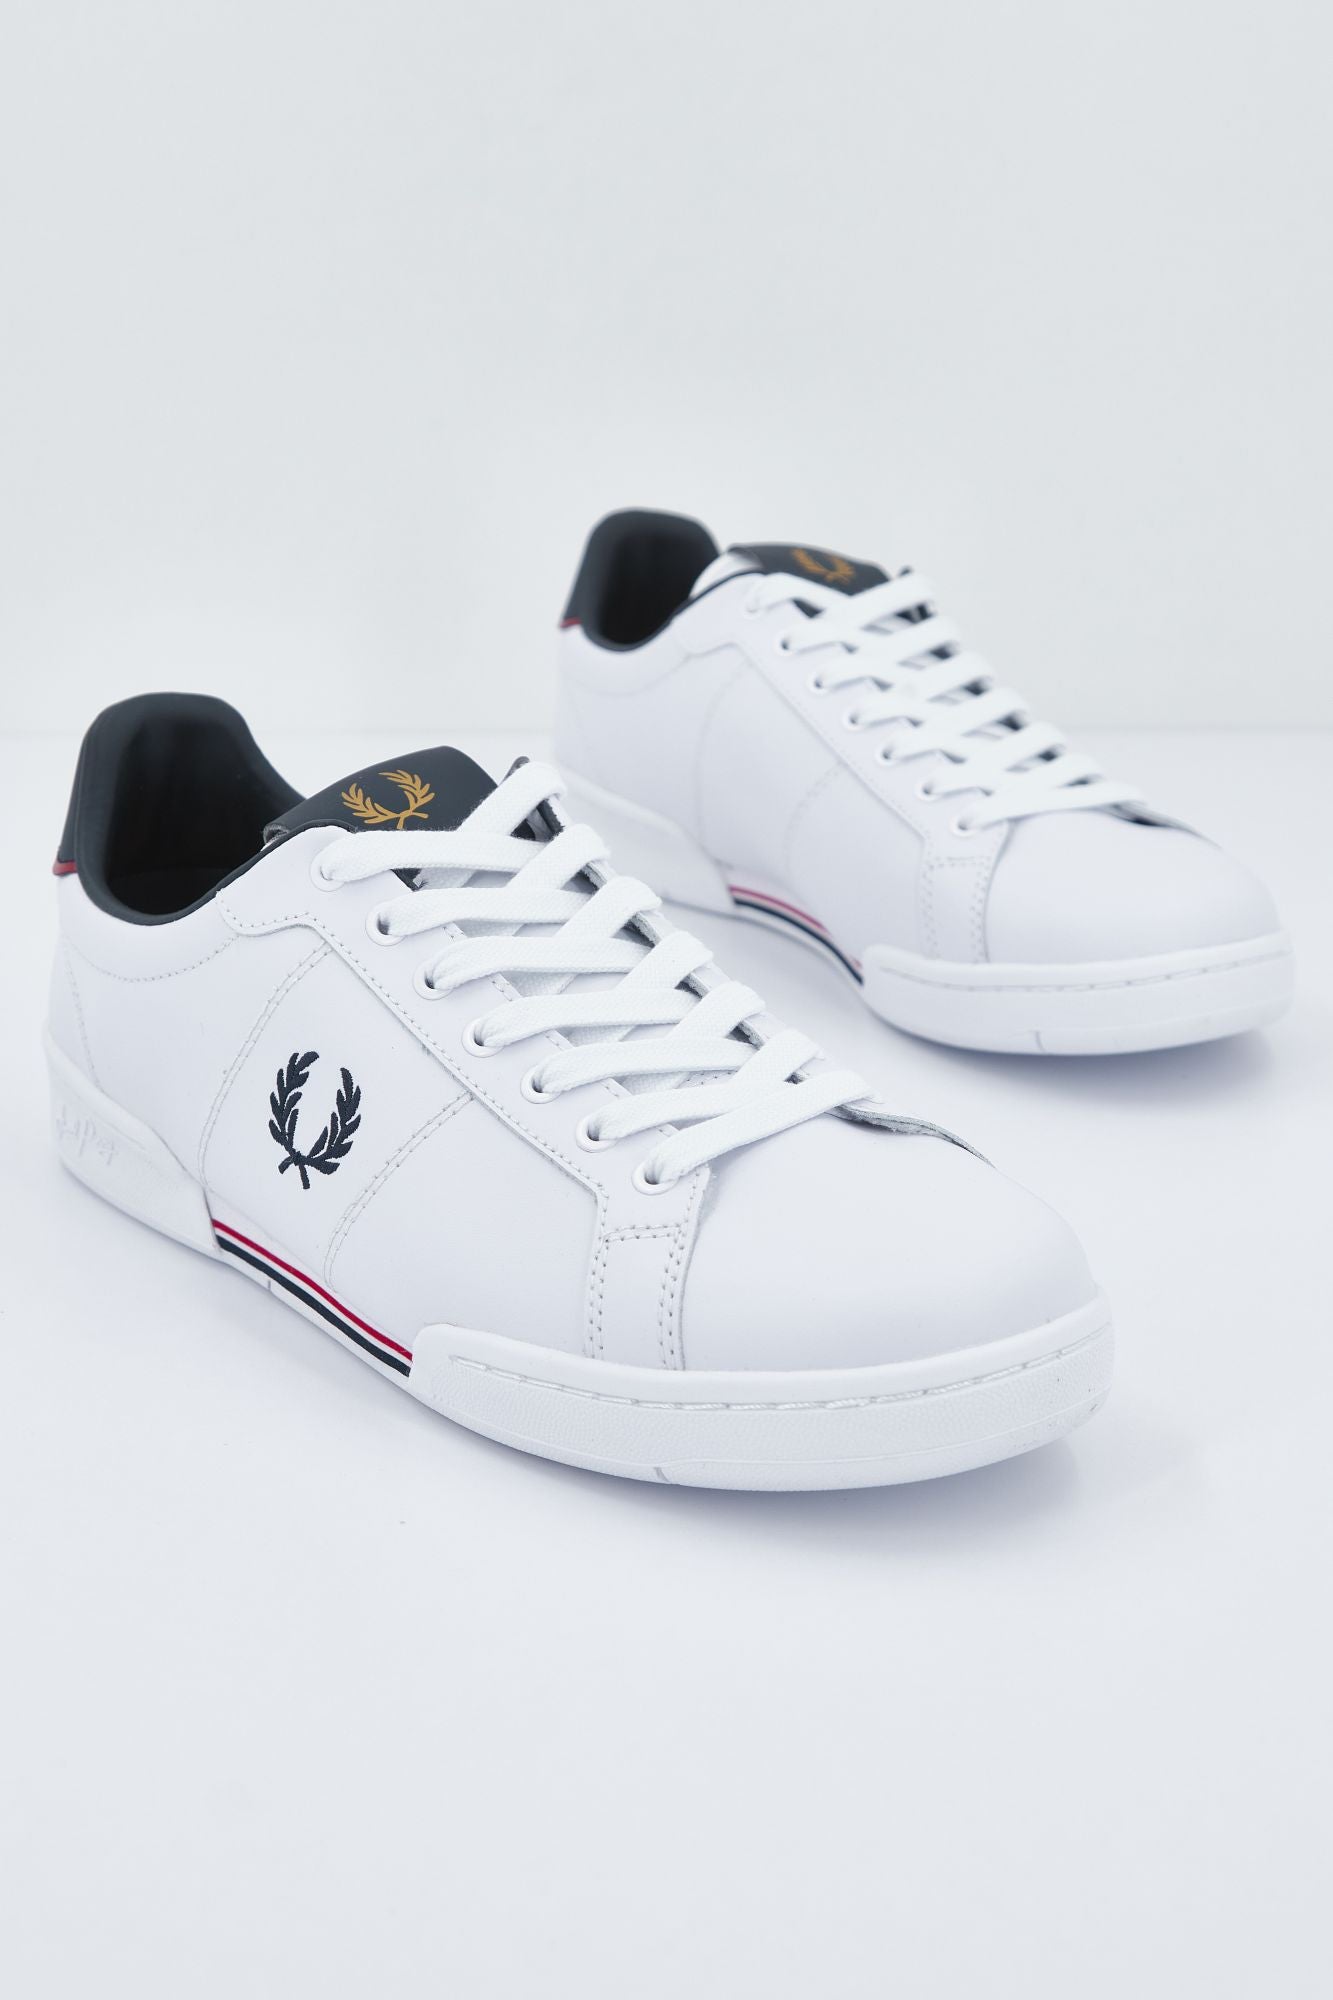 FRED PERRY B722 LEATHER en color BLANCO (2)